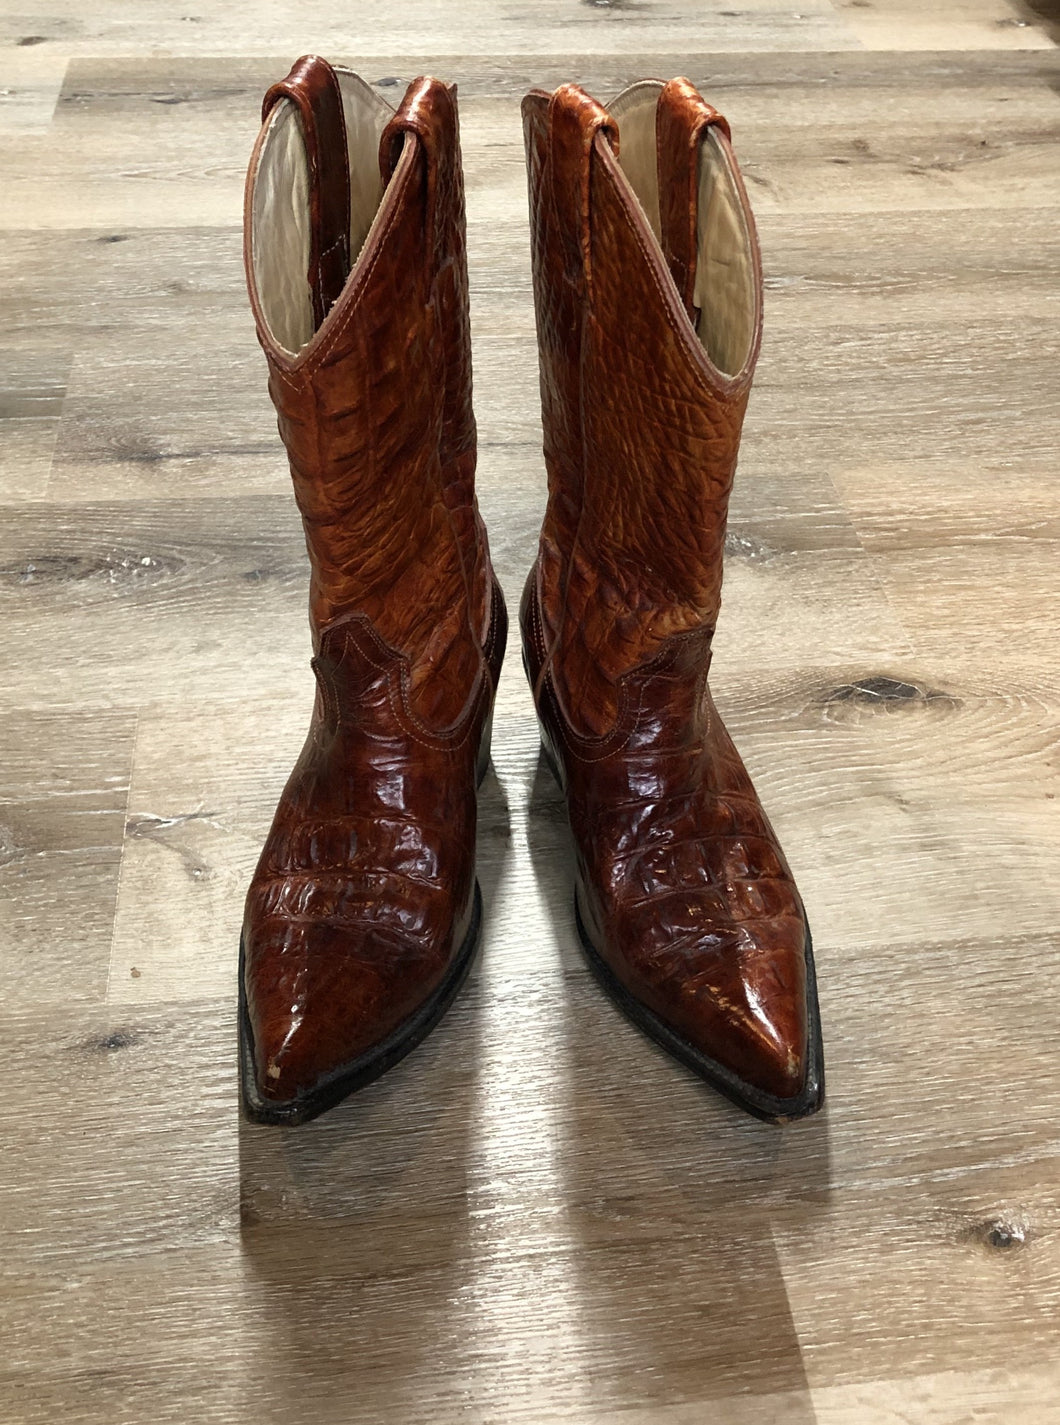 Kingspier Vintage - Rogers reptile skin cowboy boots with pointed toe and leather soles.

Size 6 Mens

The uppers and soles are in good condition with some overall wear.